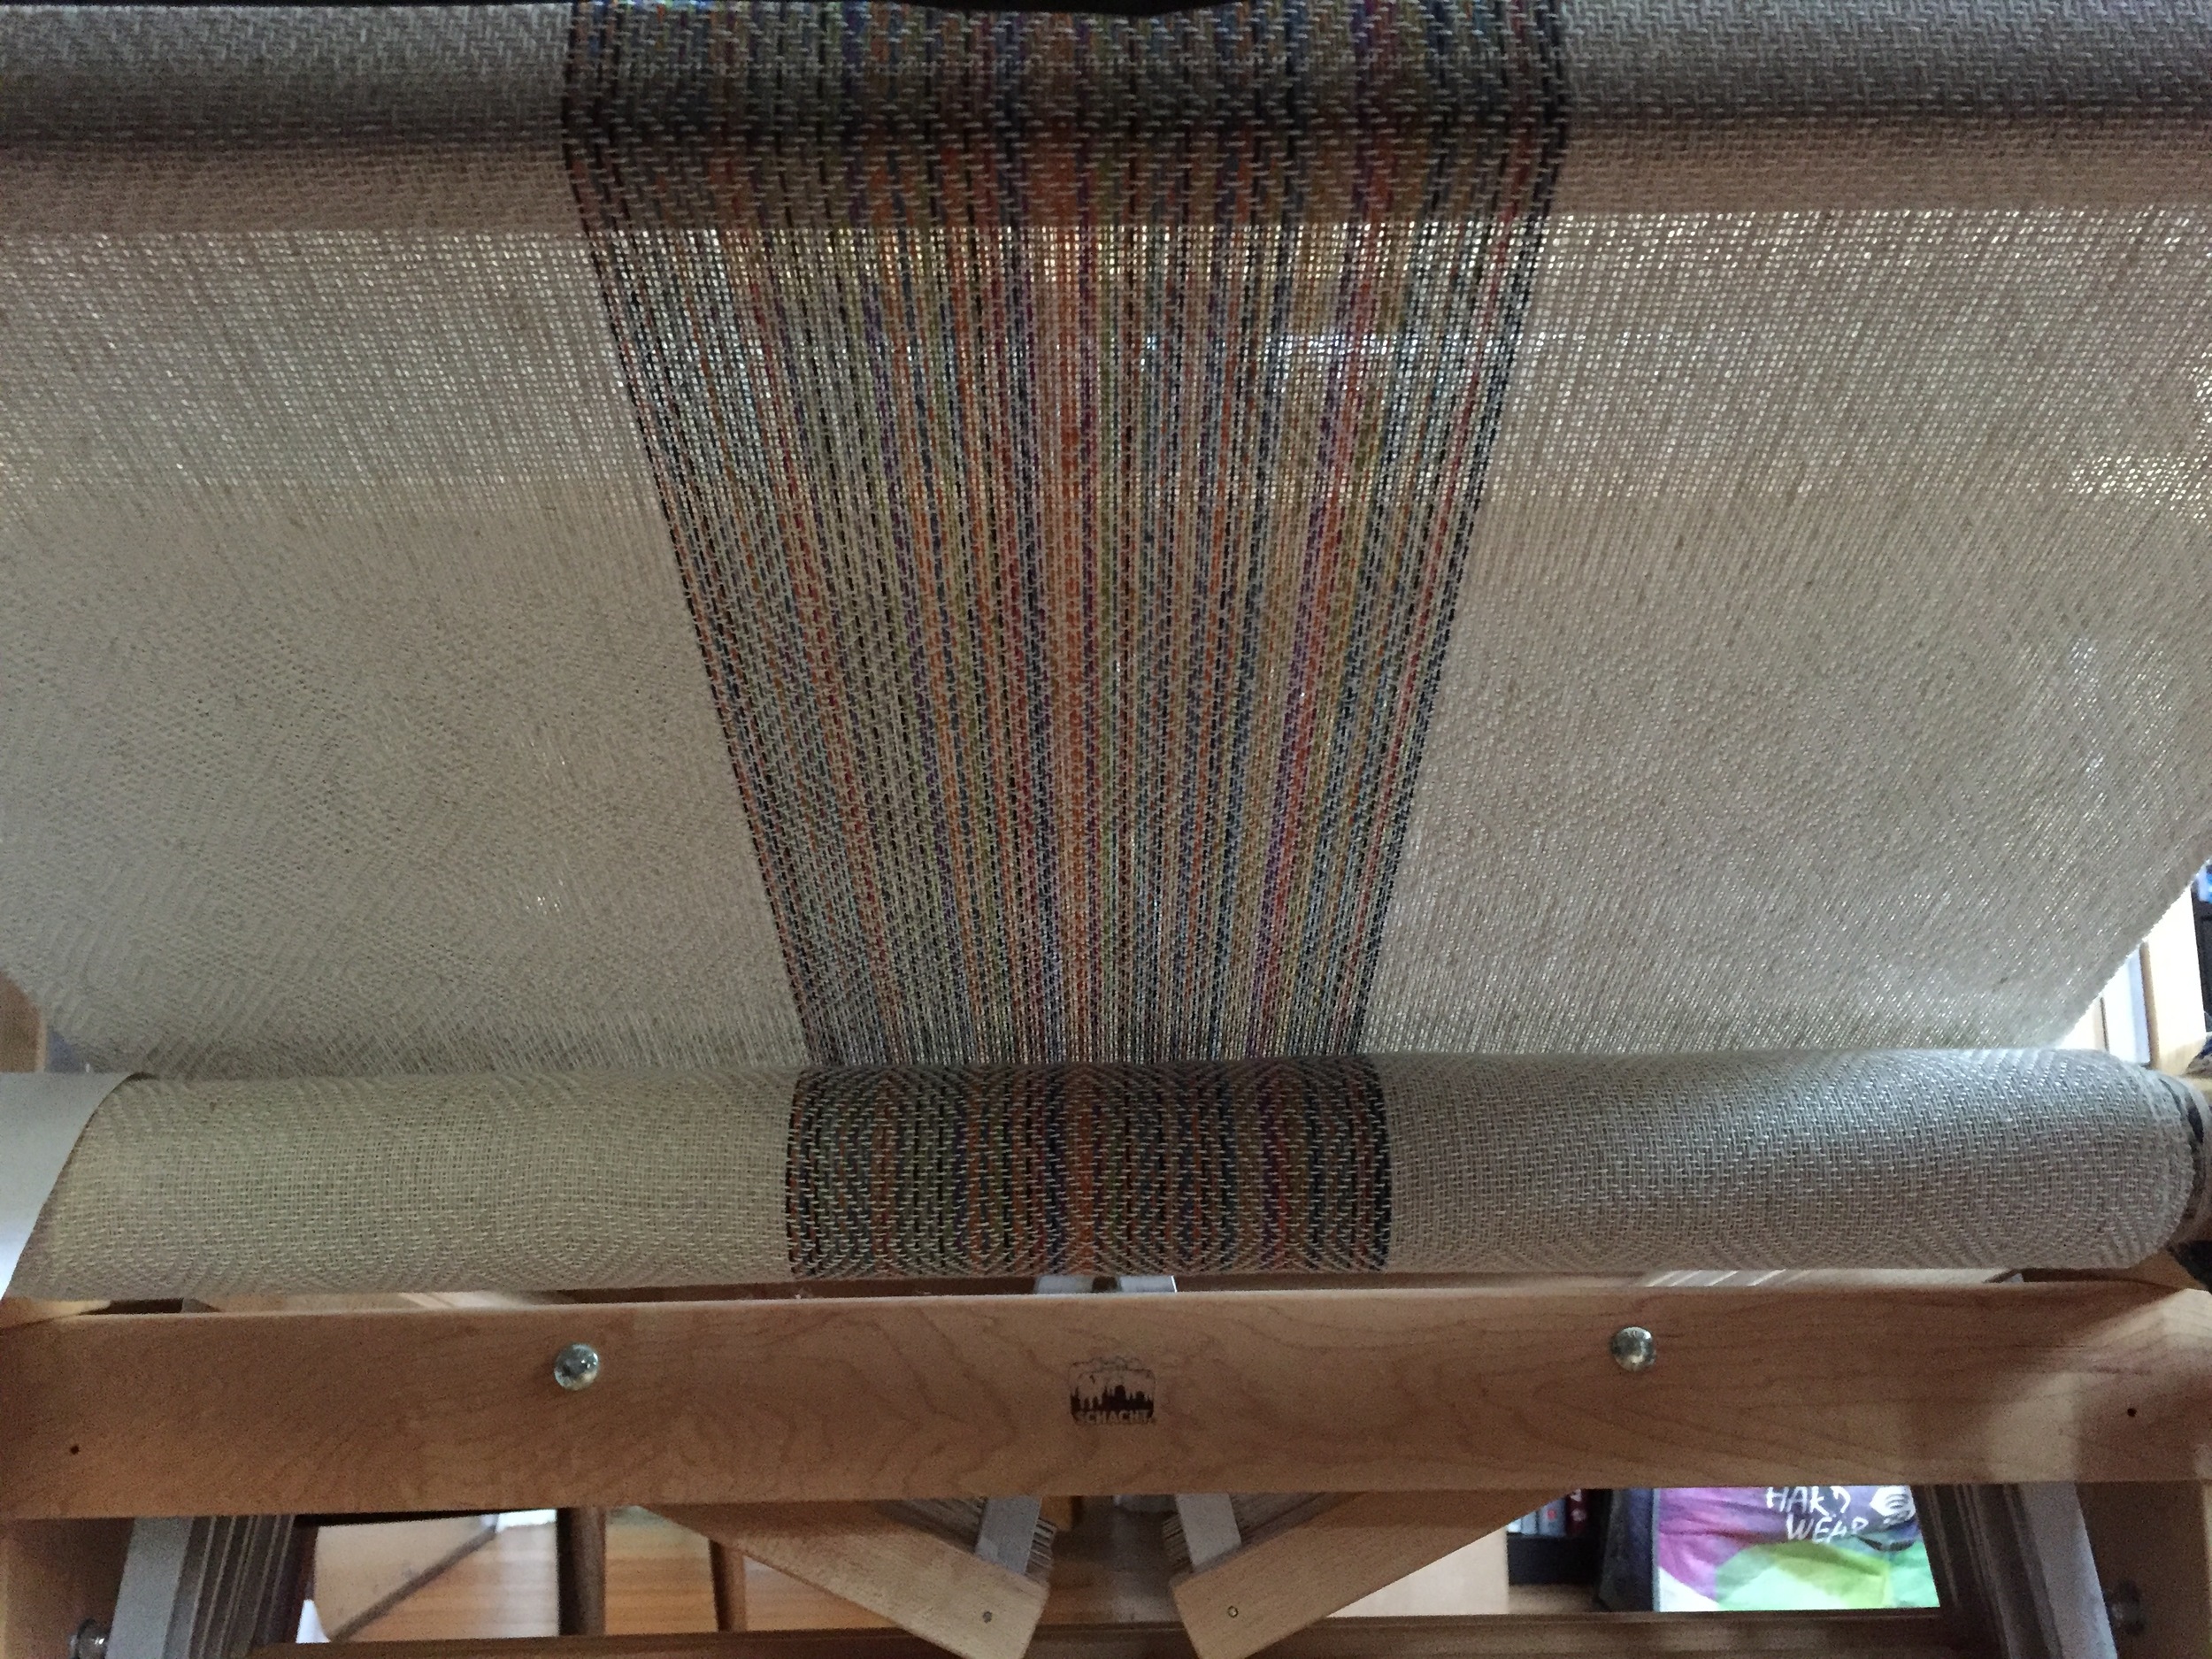 Underside- wrapping onto the loom